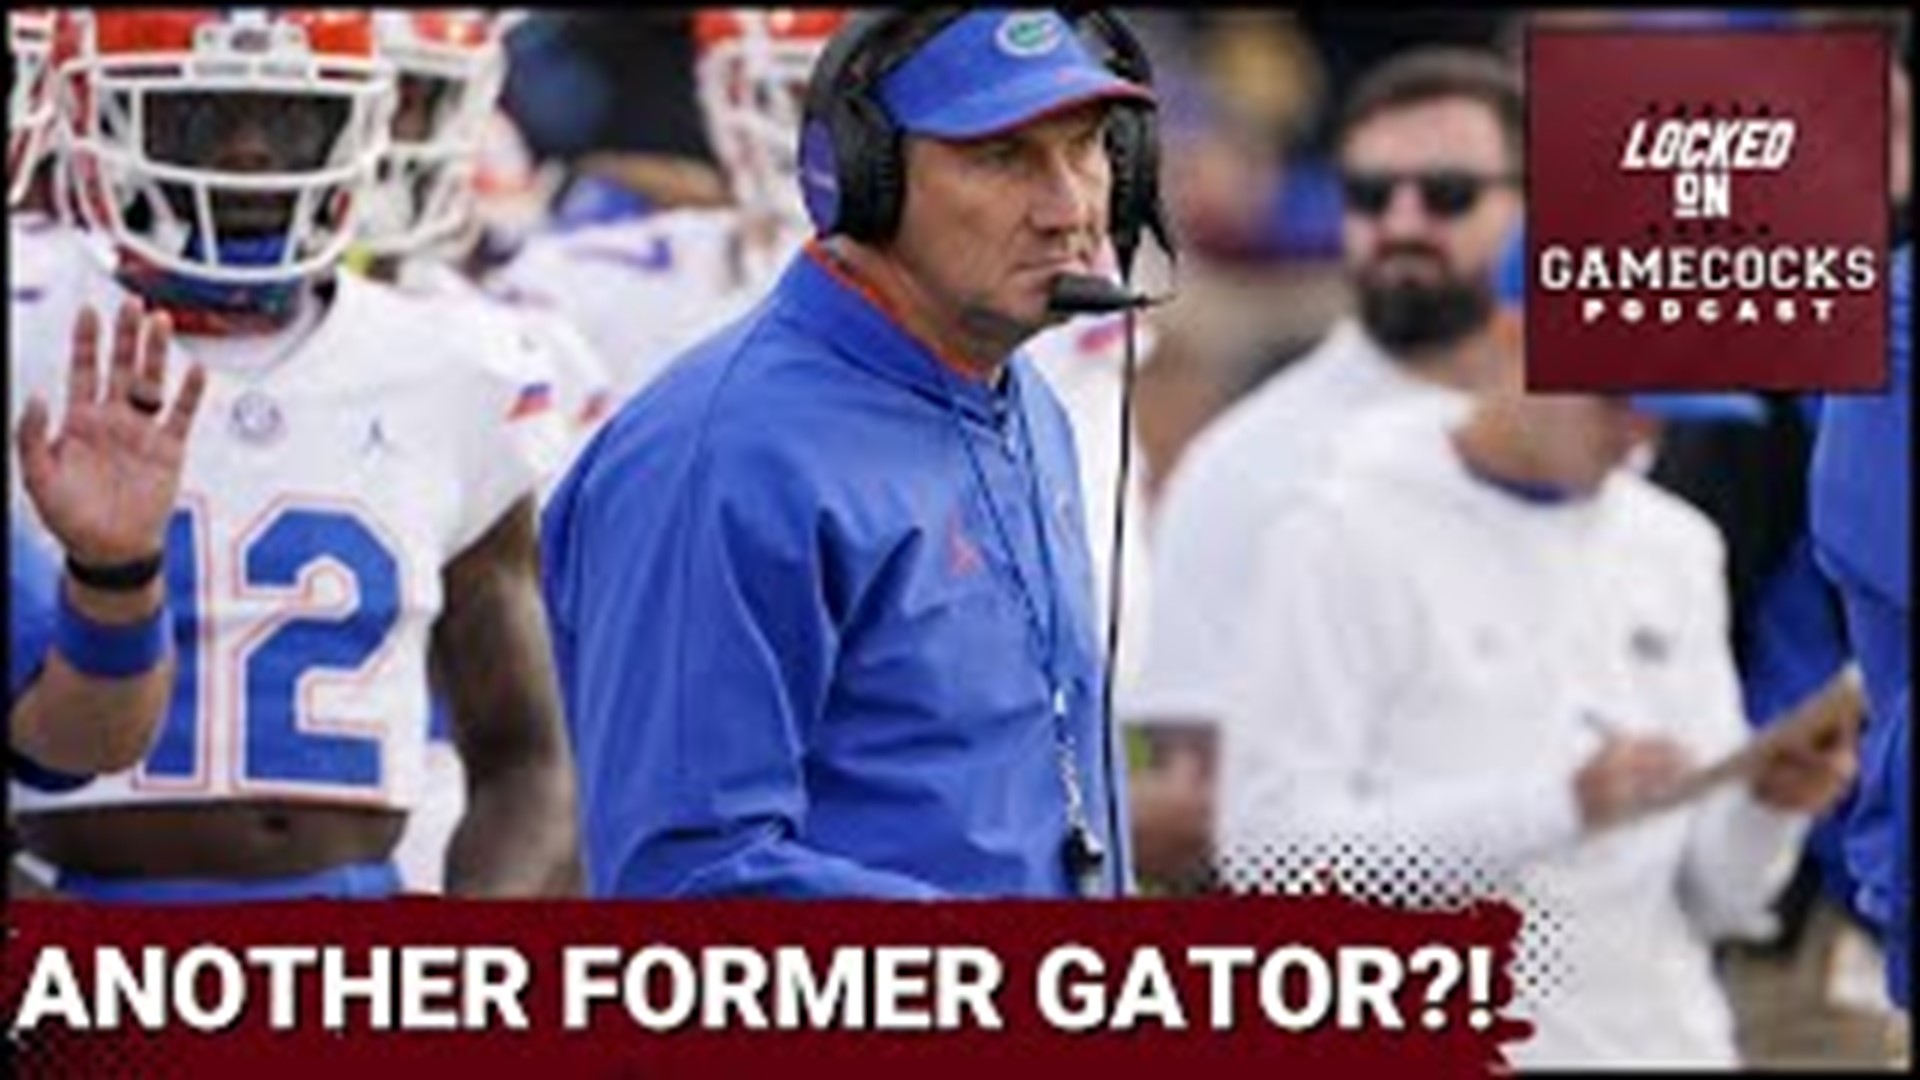 Andrew dives into the Dan Mullen to South Carolina rumor, talks about the effects Spencer Rattler's decision could have on Shane Beamer and the Gamecocks.